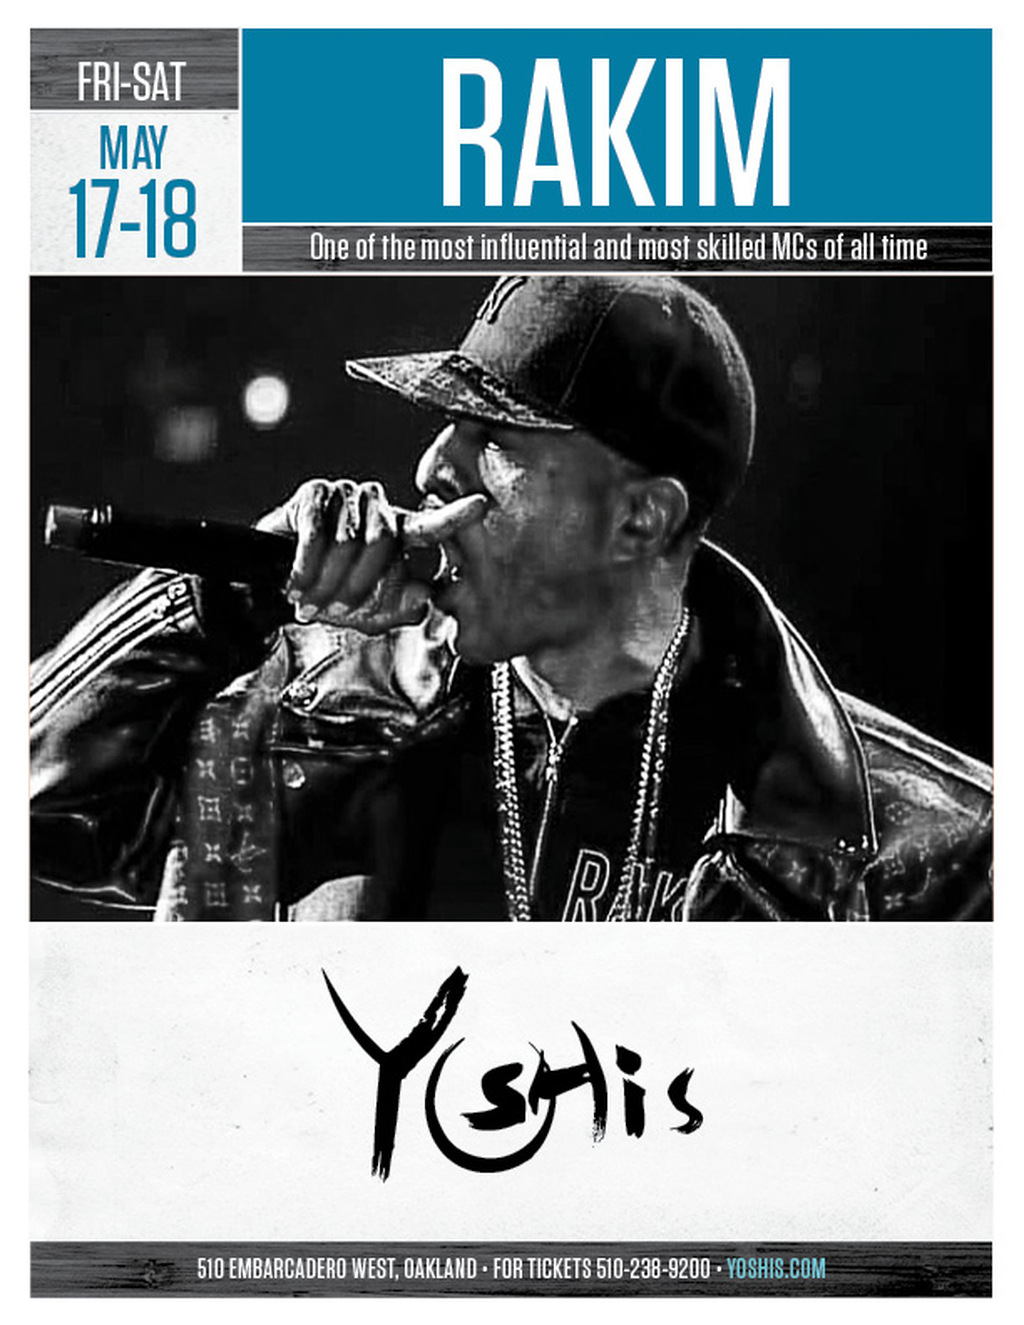 Yoshi s Experience the Best of Hip Hop at Yoshi s in Oakland promotion flier on Digifli com